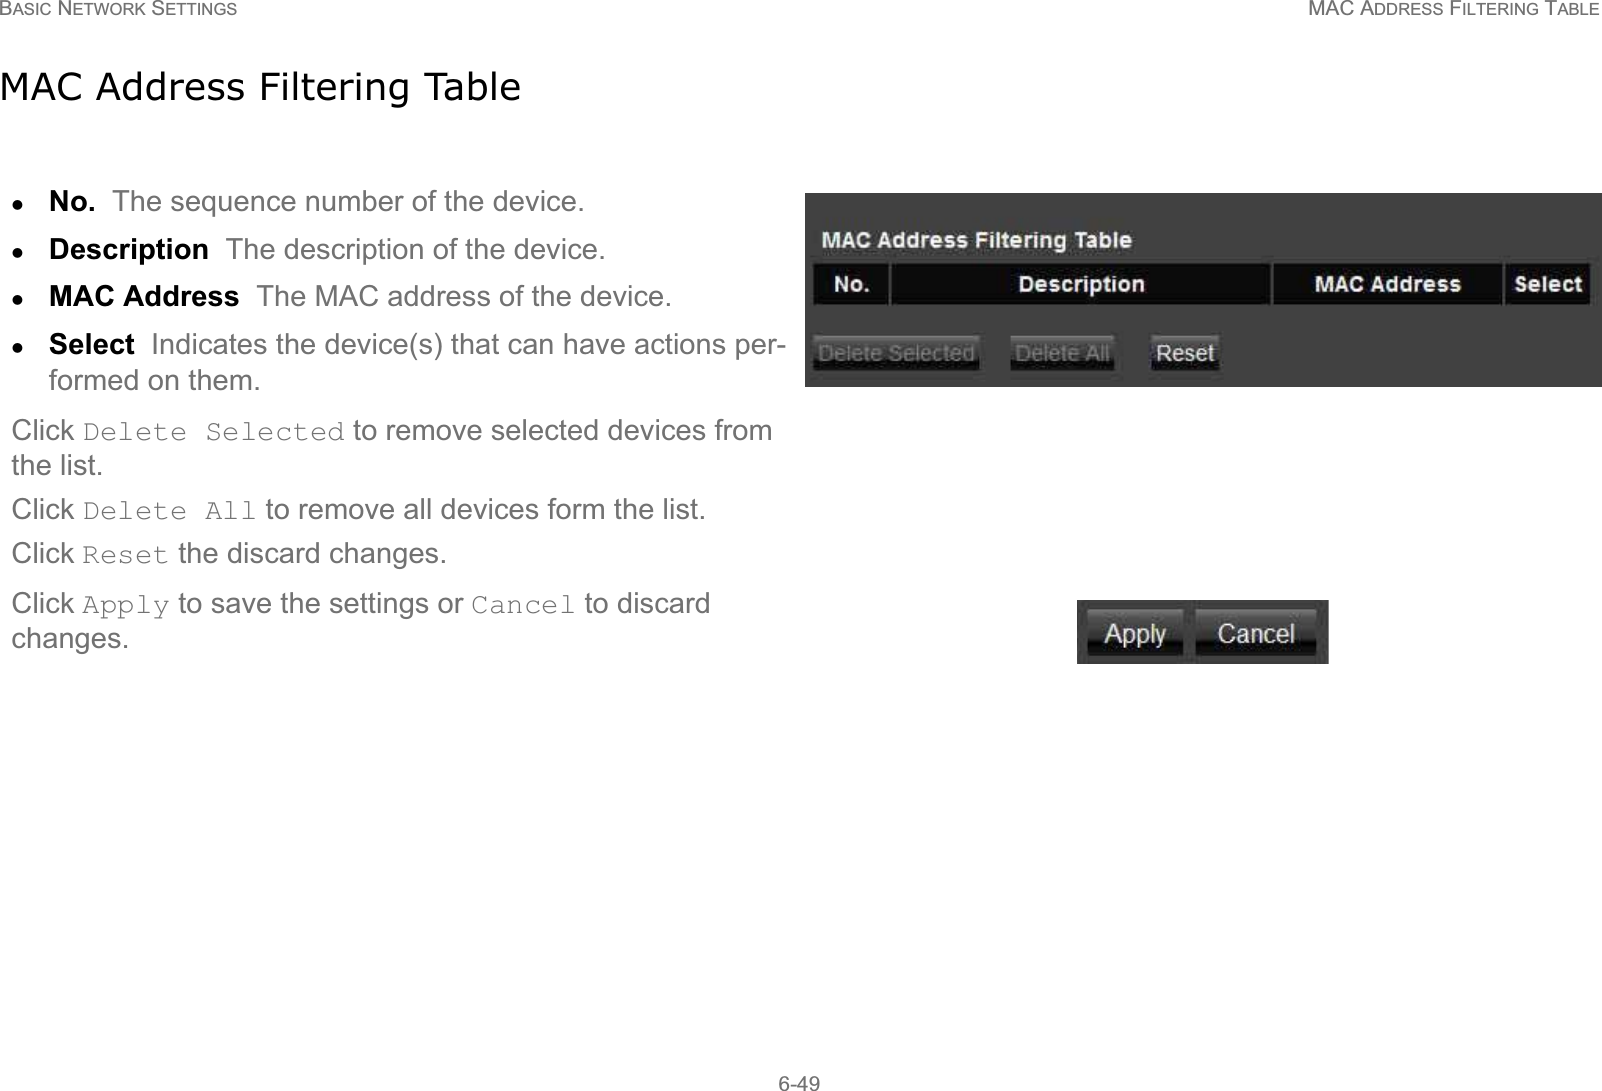 BASIC NETWORK SETTINGS MAC ADDRESS FILTERING TABLE6-49MAC Address Filtering TablezNo.  The sequence number of the device.zDescription  The description of the device.zMAC Address  The MAC address of the device.zSelect  Indicates the device(s) that can have actions per-formed on them.Click Delete Selected to remove selected devices from the list.Click Delete All to remove all devices form the list.Click Reset the discard changes.Click Apply to save the settings or Cancel to discard changes.